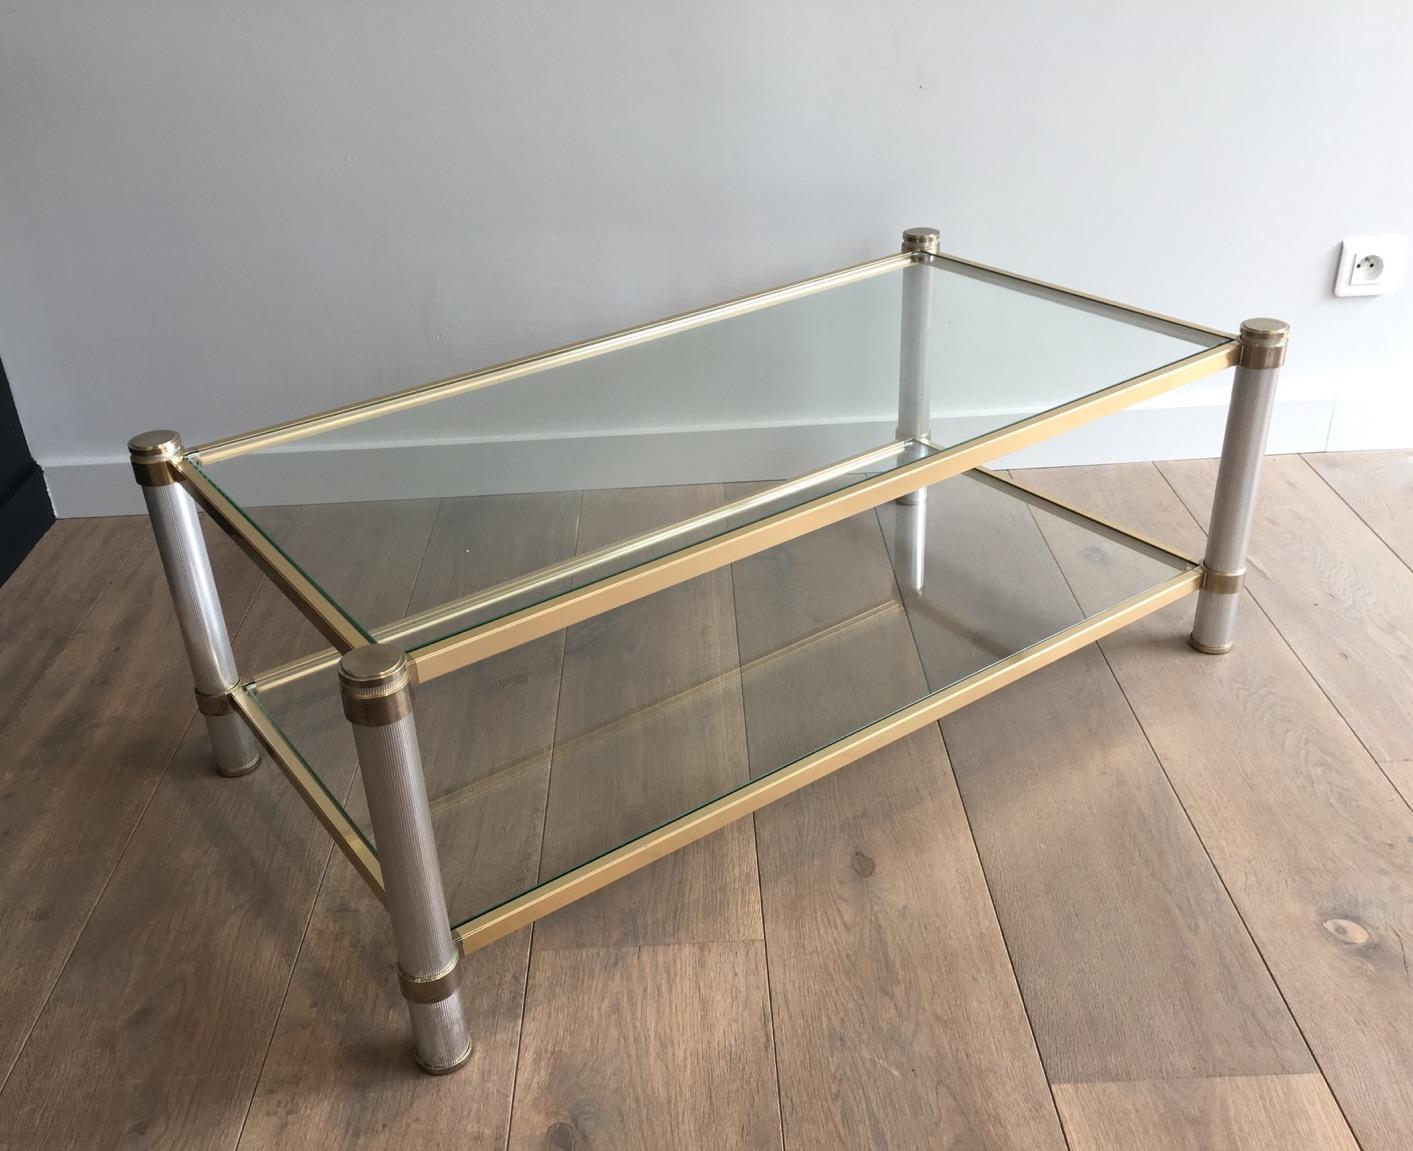  Gold Gilt and Silver Color Aluminium Coffee table with Fluted Legs by P. Vandel For Sale 7